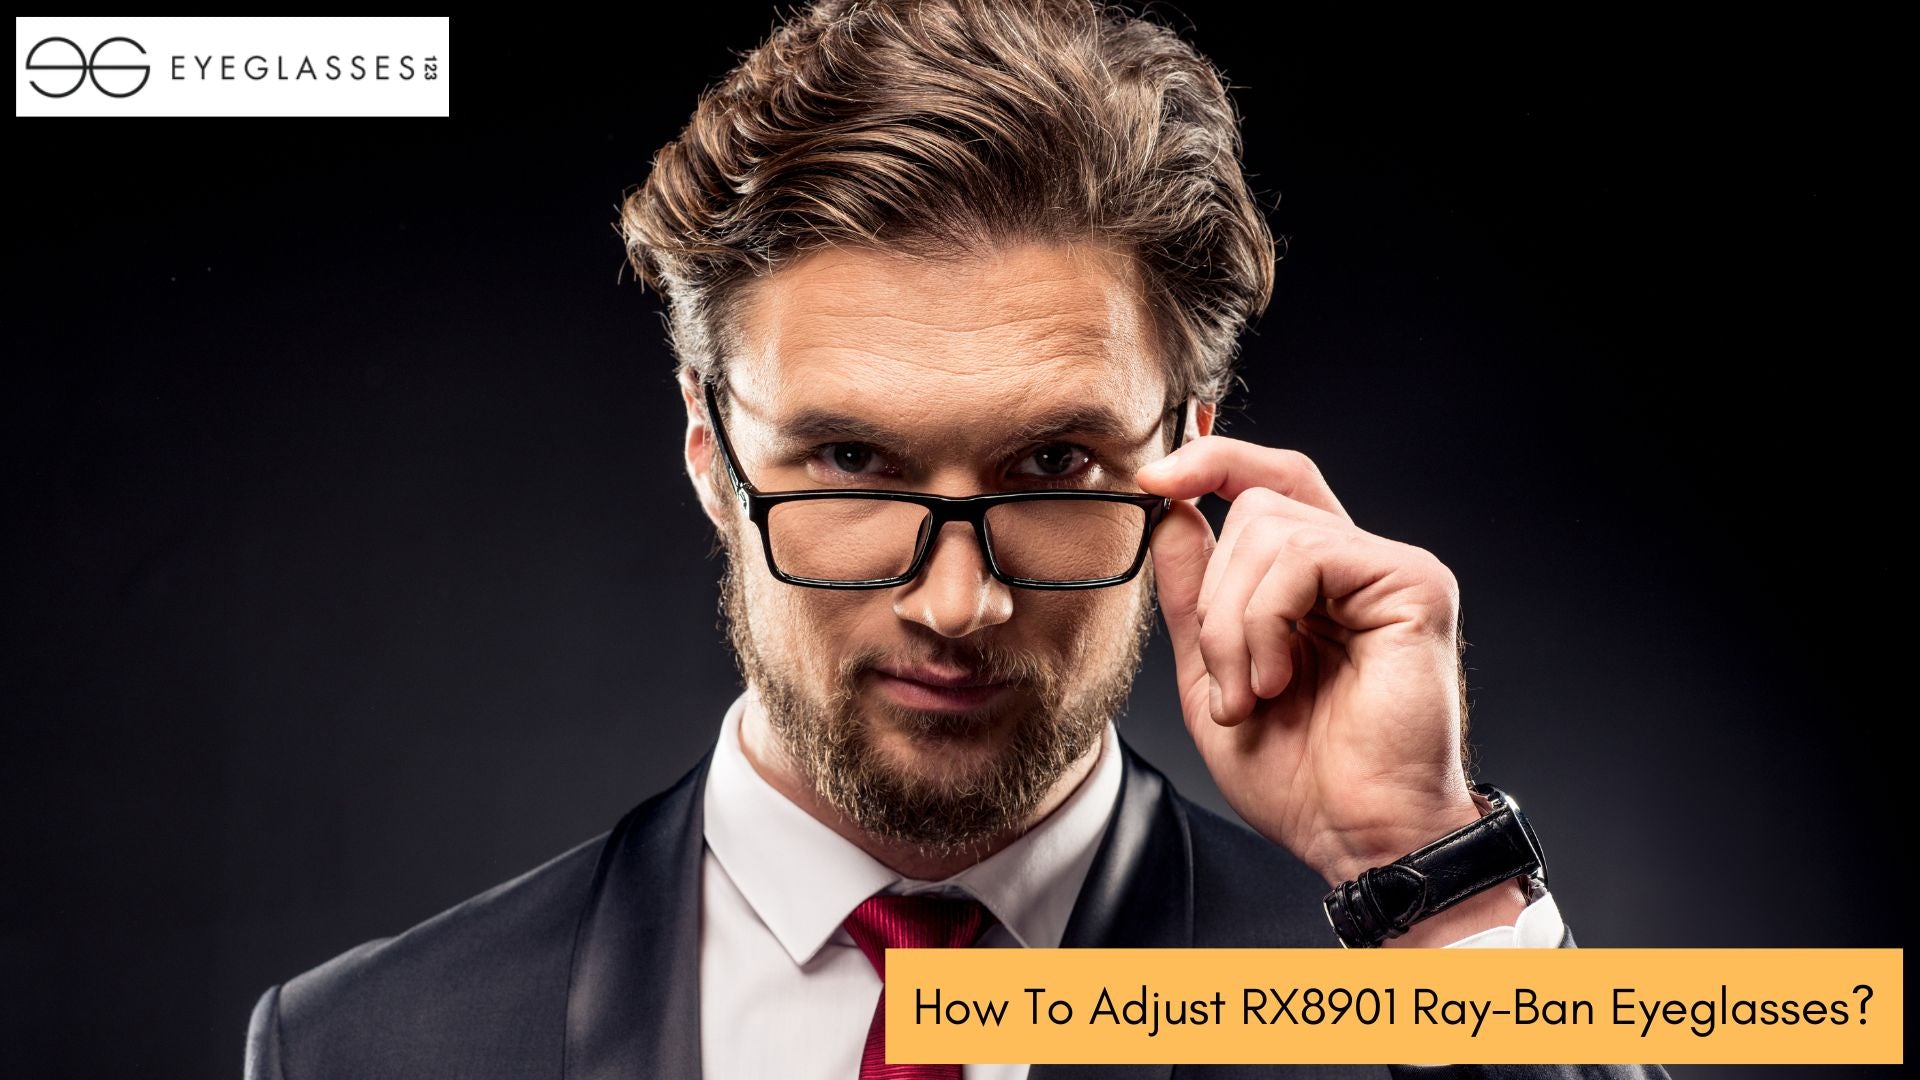 How To Adjust RX8901 Ray-Ban Eyeglasses?